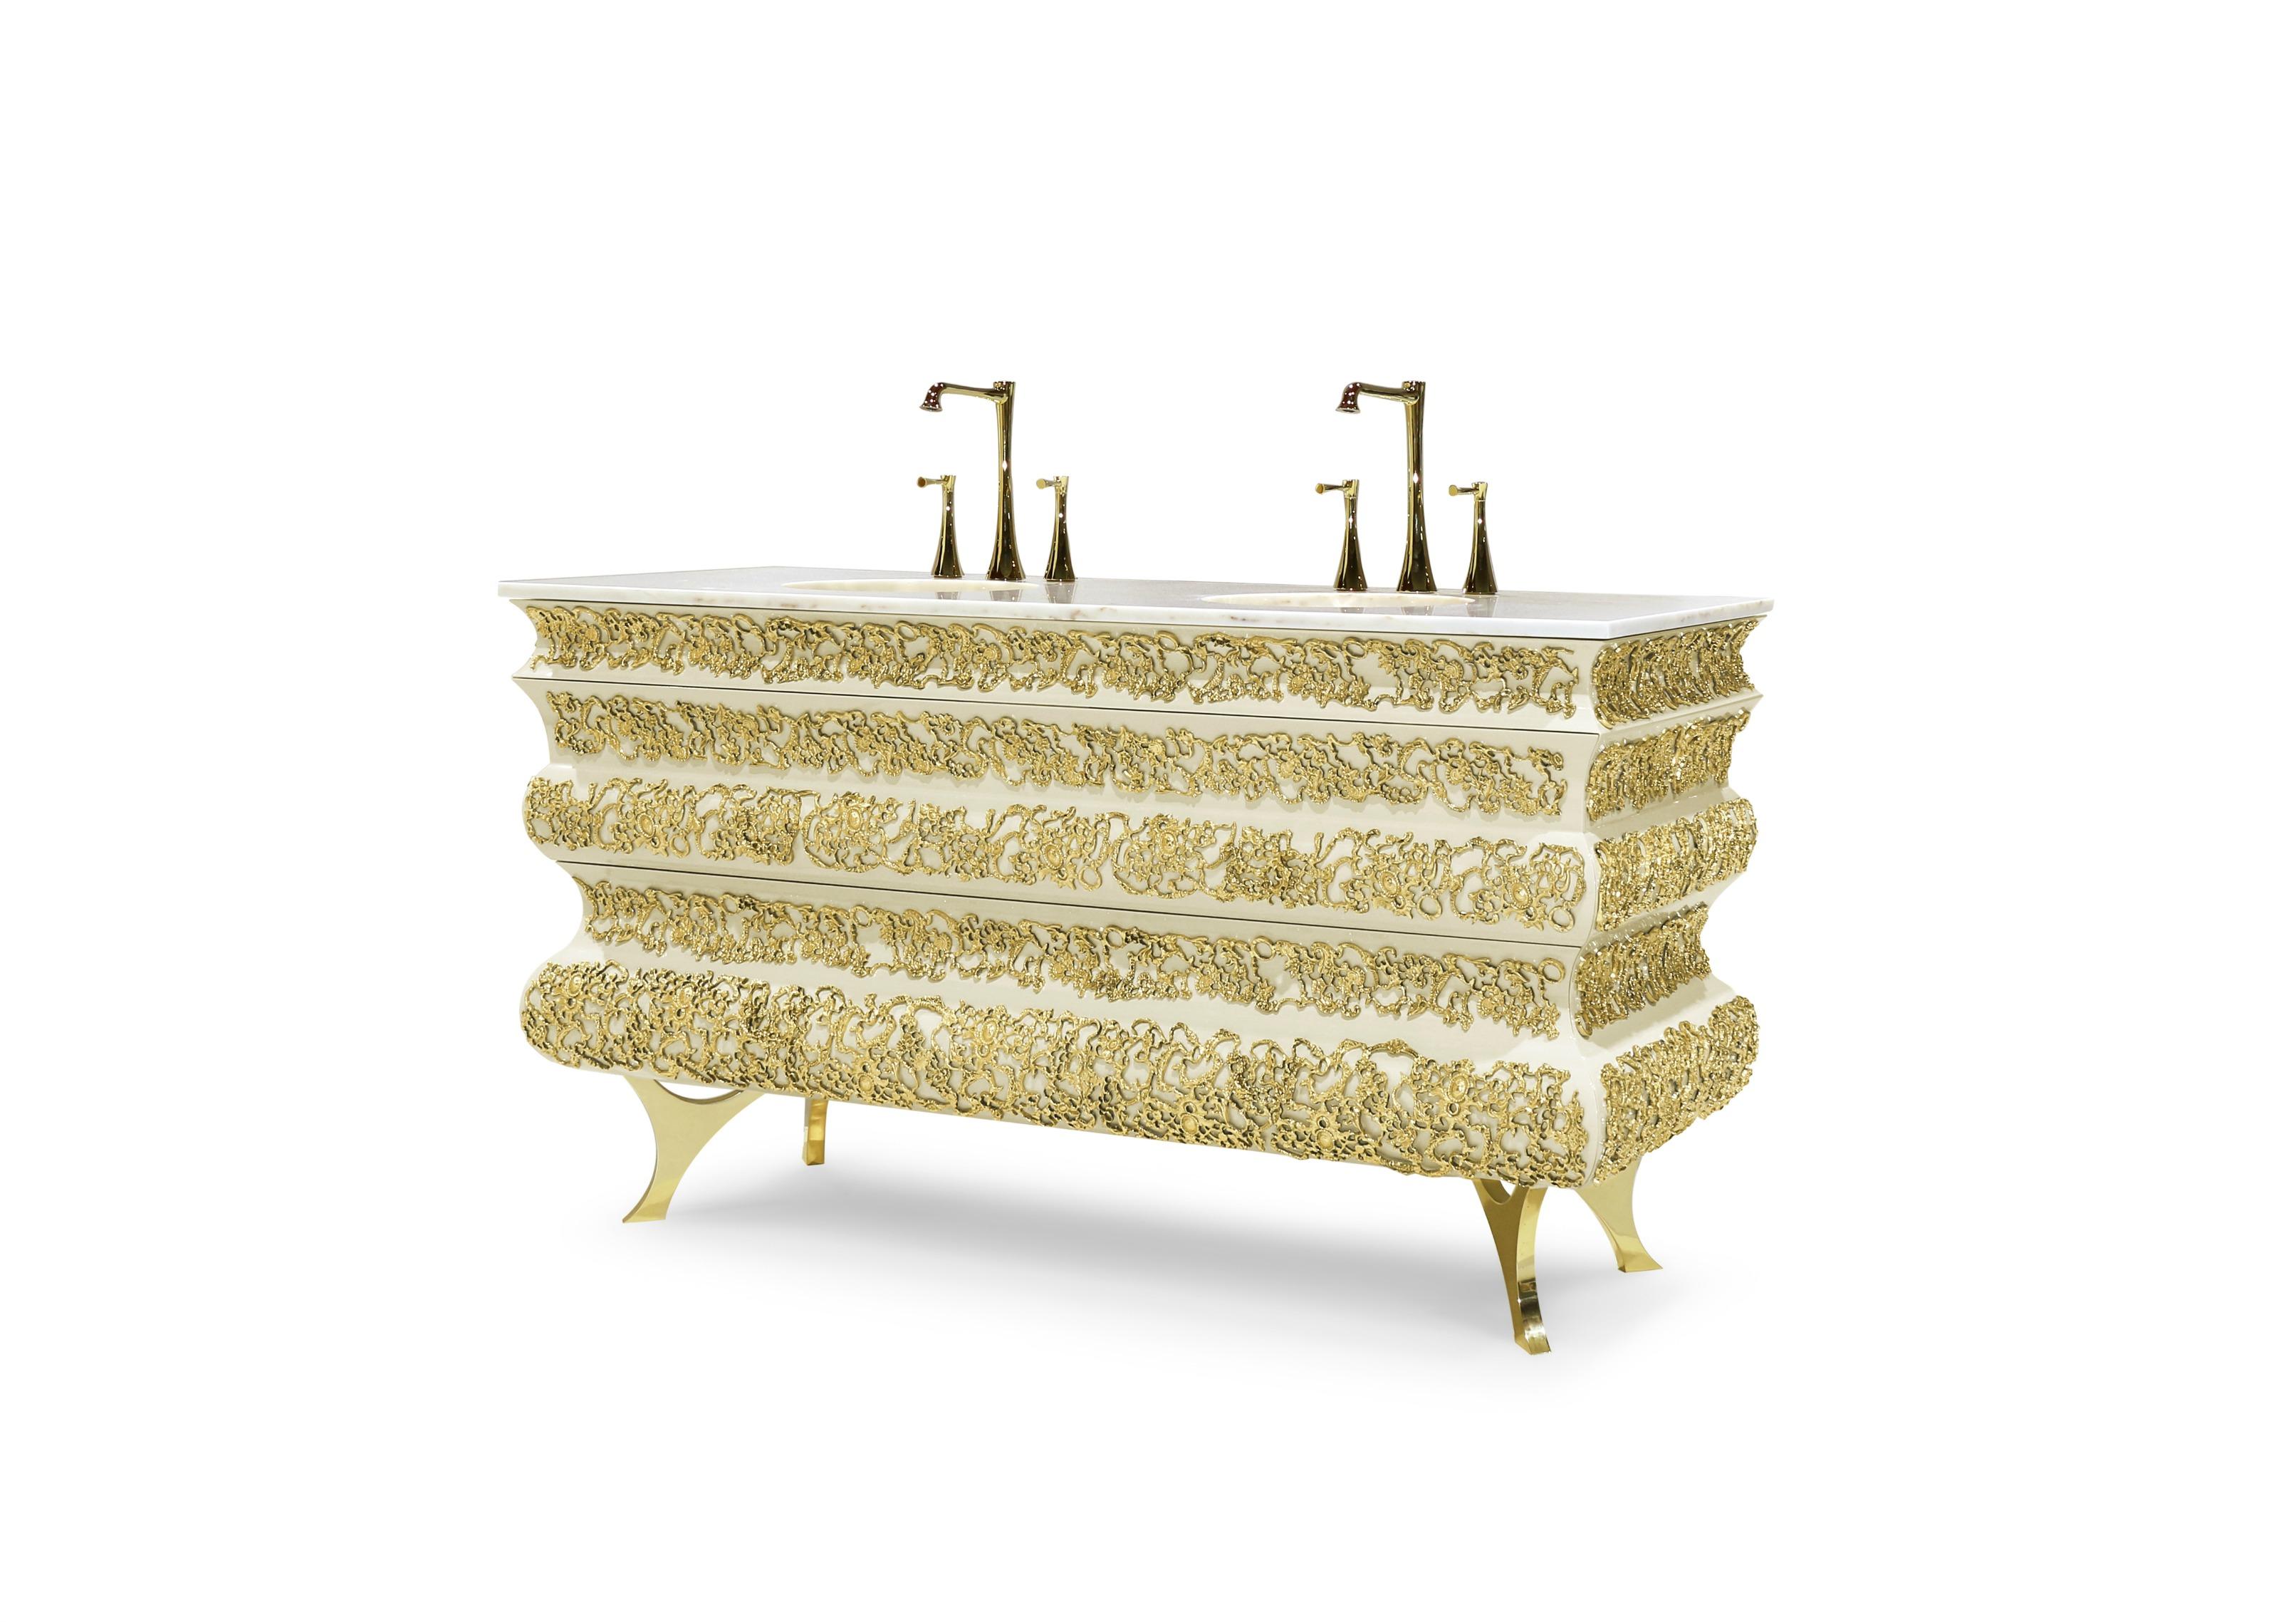 The Crochet washbasin merges a traditional knitting technique, with the best of Portuguese luxury furniture design. Inspired by the artisan method popular in Europe during 19th century, the Crochet washbasin is rich in texture, and has a timeless